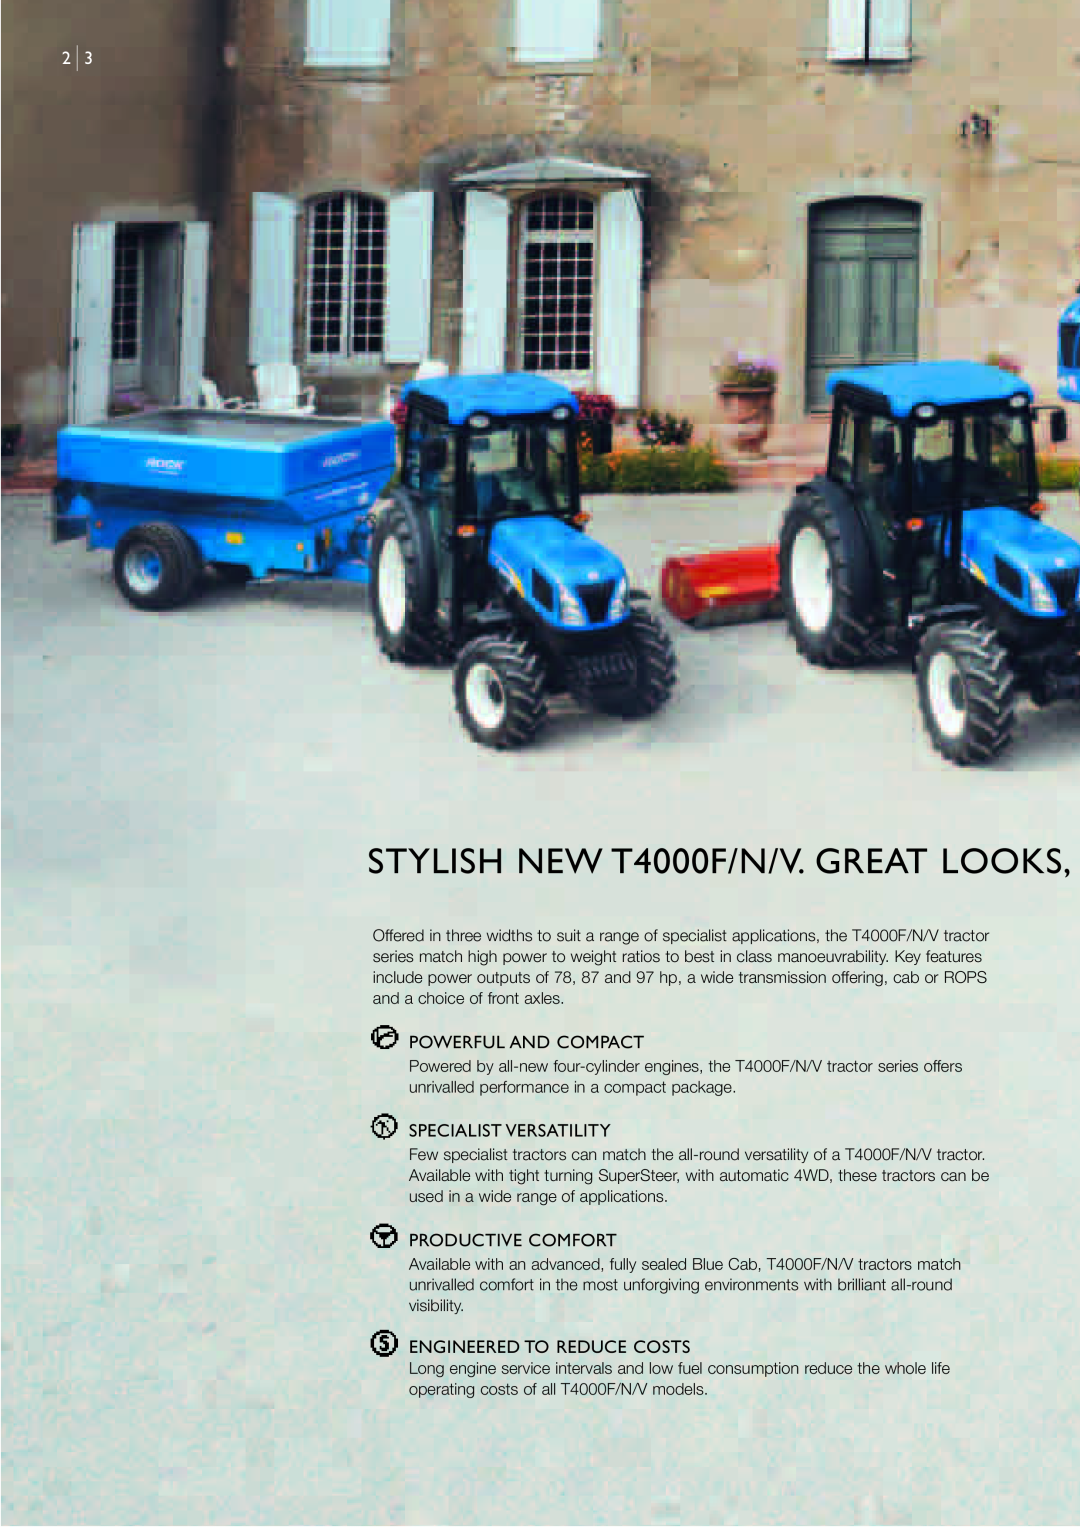 New Holland T4O3O STYLISH NEW T4000F/N/V. GREAT LOOKS, Powerful And Compact, Specialist Versatility, Productive Comfort 